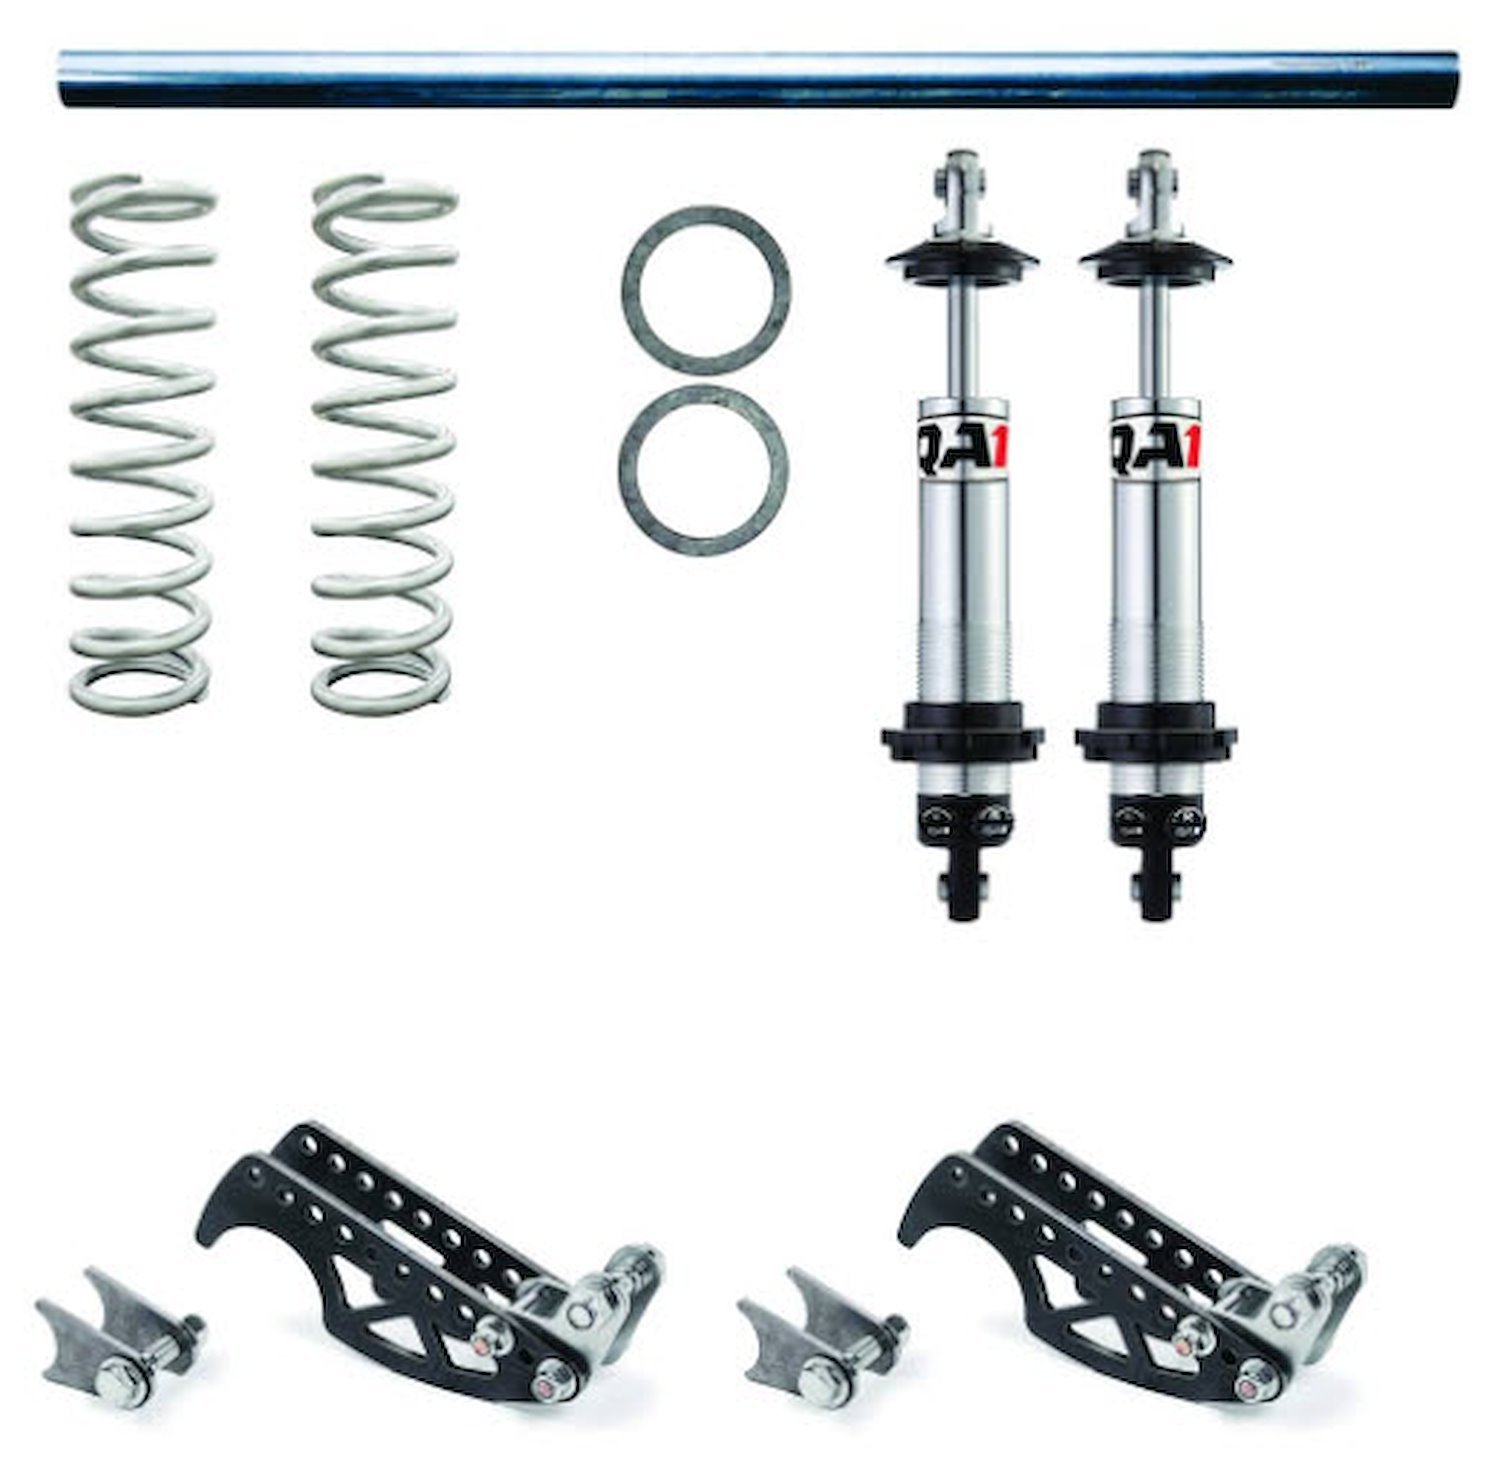 DD501-12300 Heavy-Duty Pro Rear Coil-Over Conversion System for 3 in. Axle Tubes w/Double-Adjustable Shocks & 300 lb. Springs